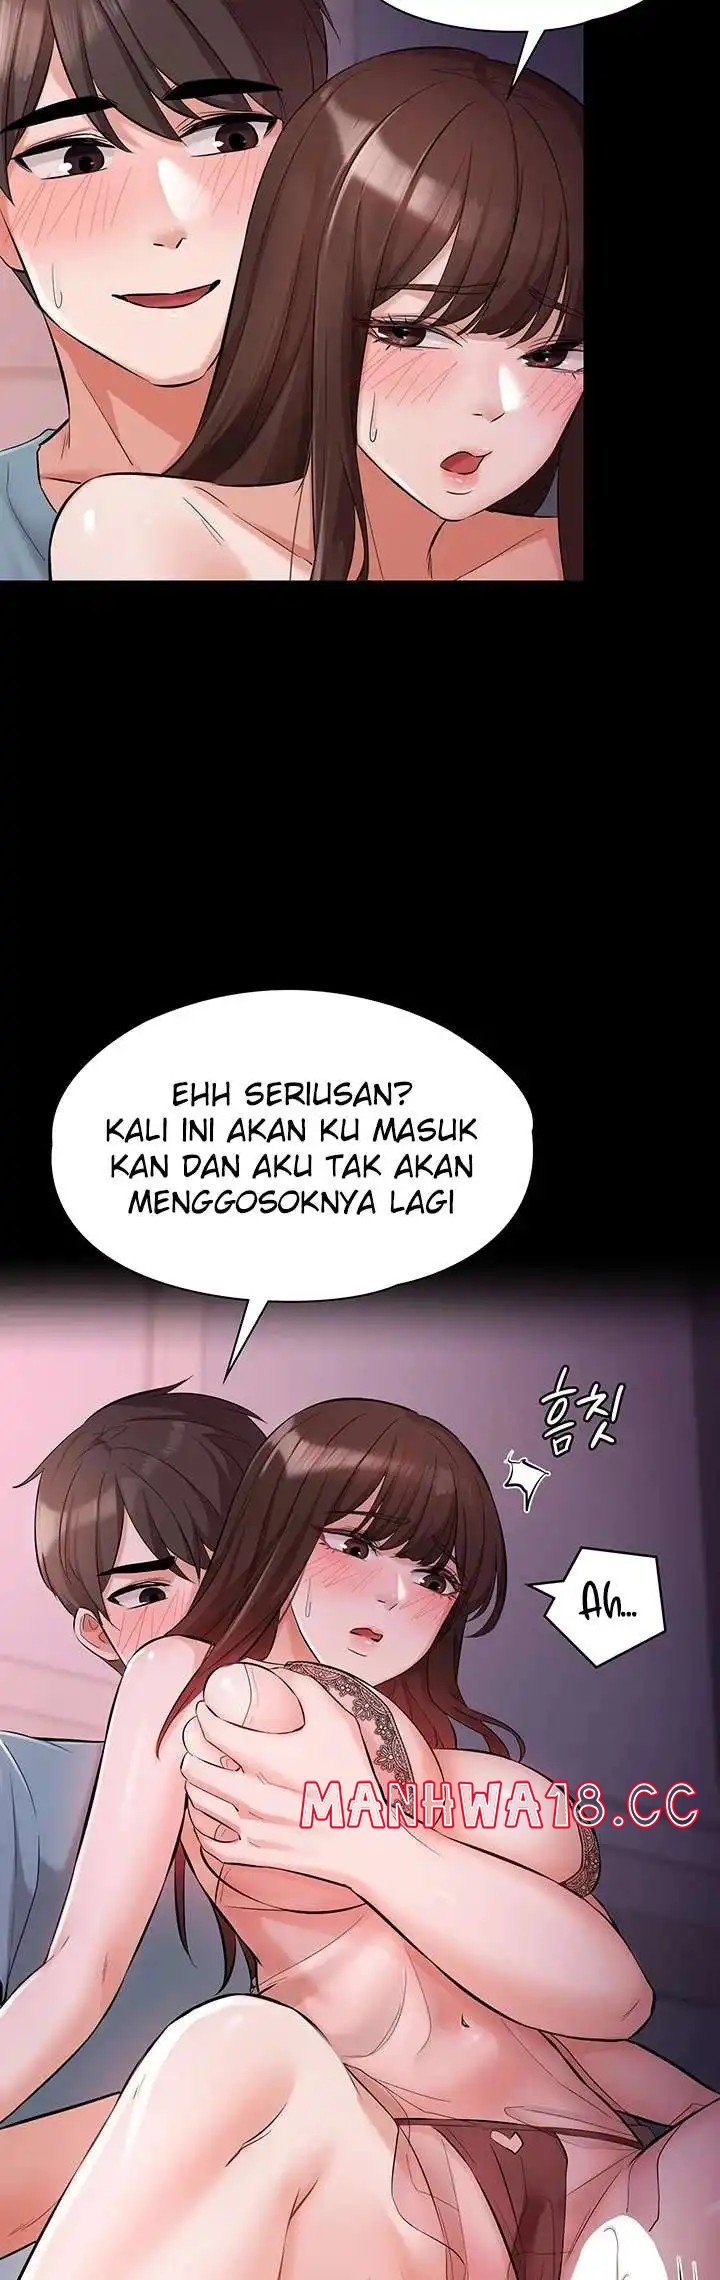 shes-not-my-sister-raw-chap-22-28